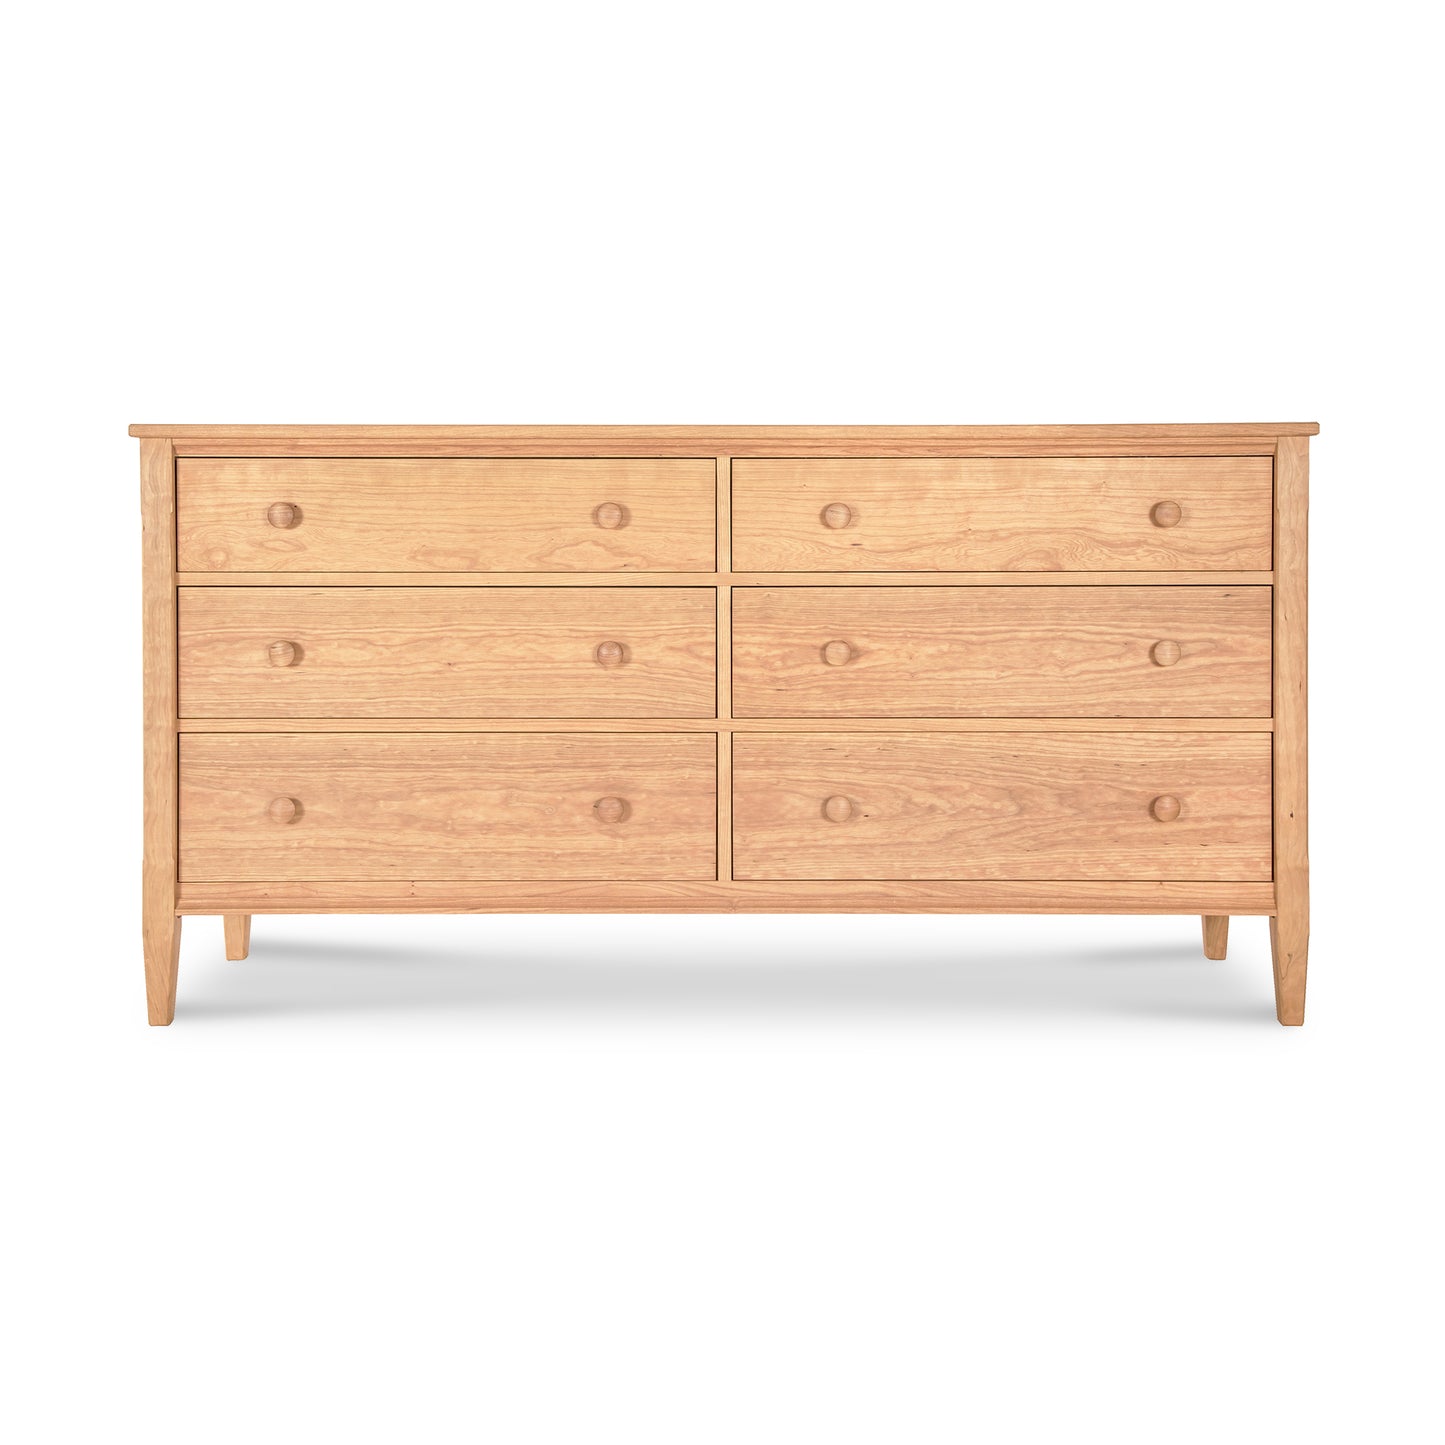 A Vermont Shaker 6-Drawer Dresser from Maple Corner Woodworks, featuring a simple, streamlined design and round wooden knobs, set against a plain white background.